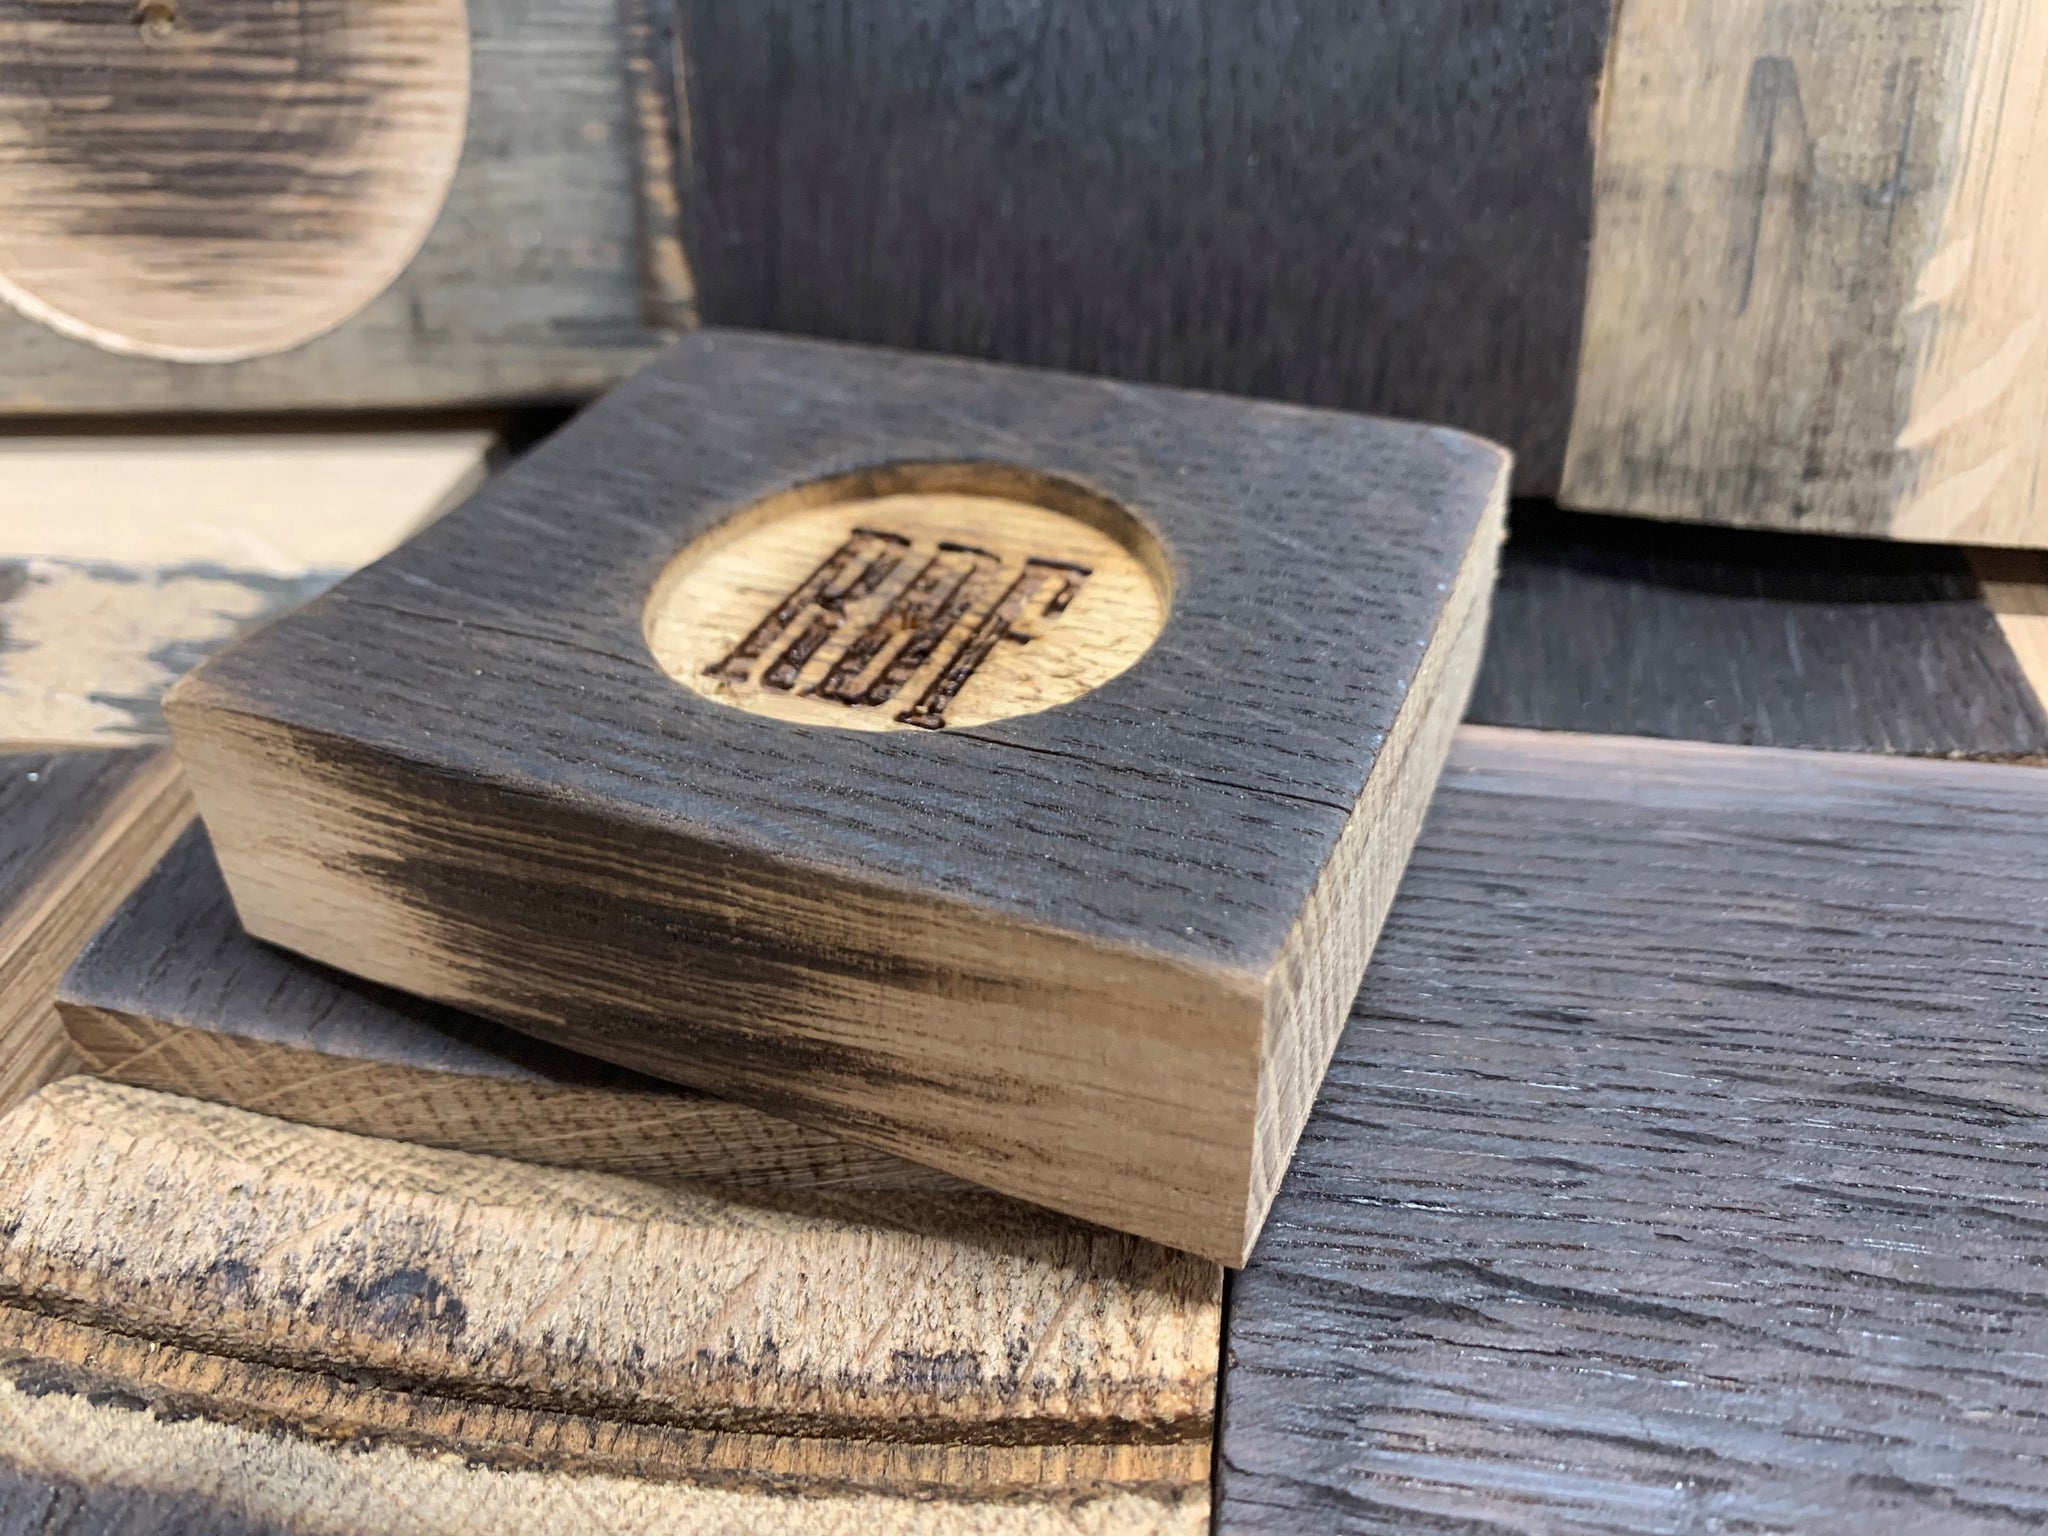 Whiskey Barrel Coaster Set - Made From A Reclaimed Whiskey